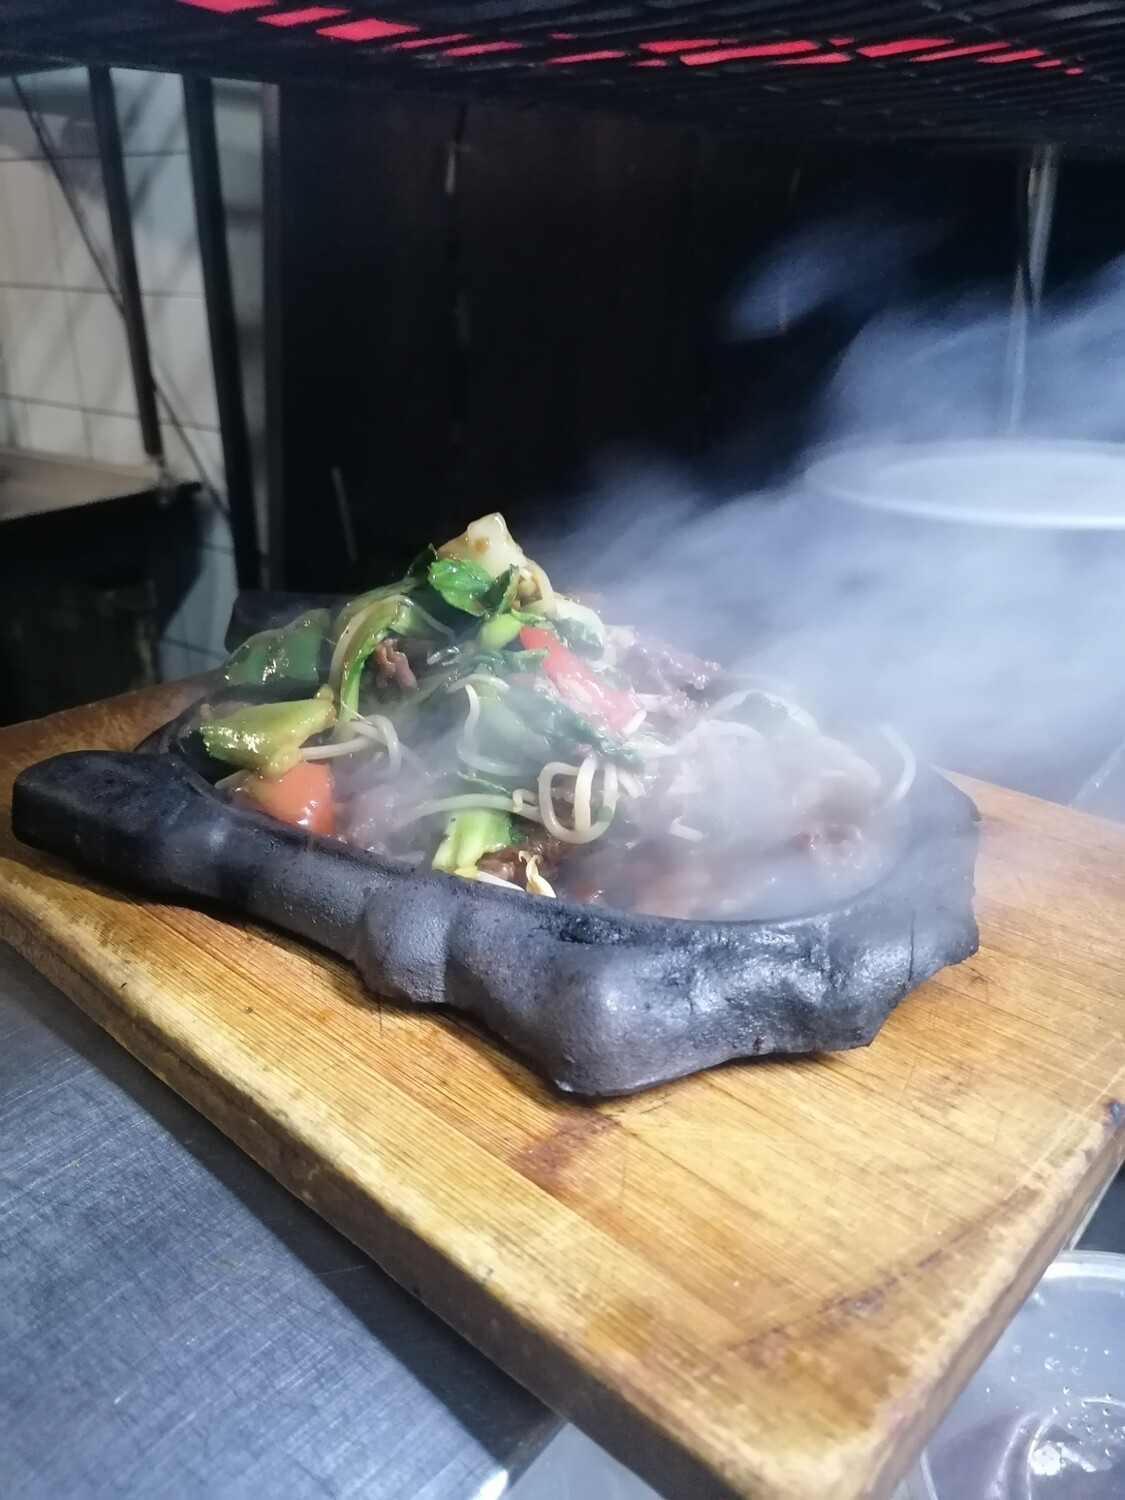 Sizzling Beef